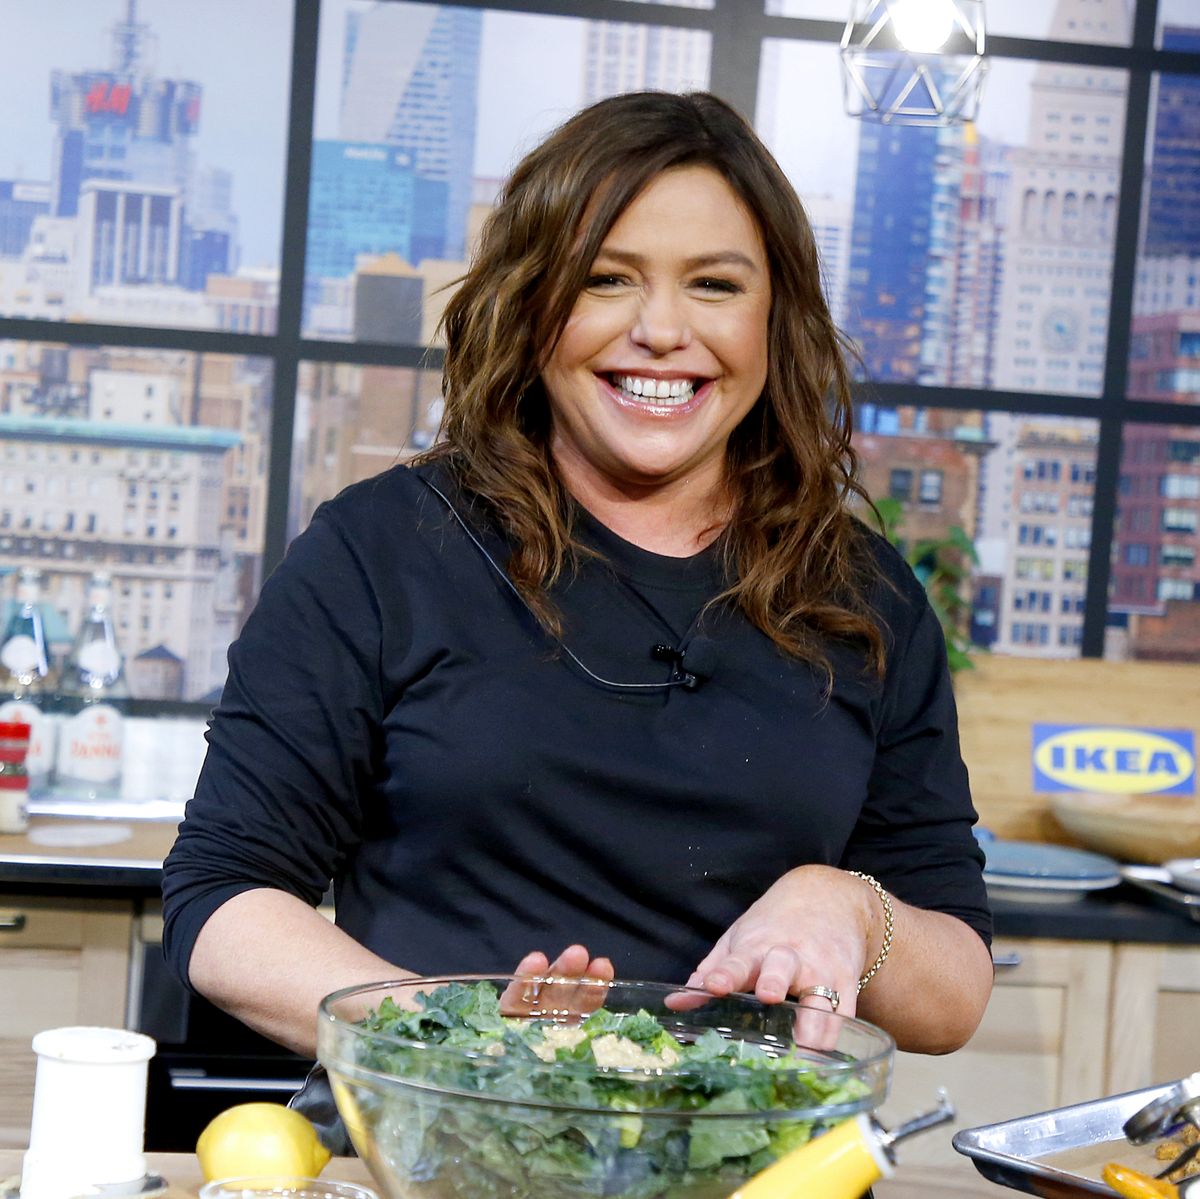 rachael ray smiles to the camera during a cooking demonstration event, she is standing in a kitchen with her hands touching a glass bowl full of salad greens she is wearing a a navy long sleeve shirt and her microphone wire is just visible, behind her are glass windows and a cityscape in the background